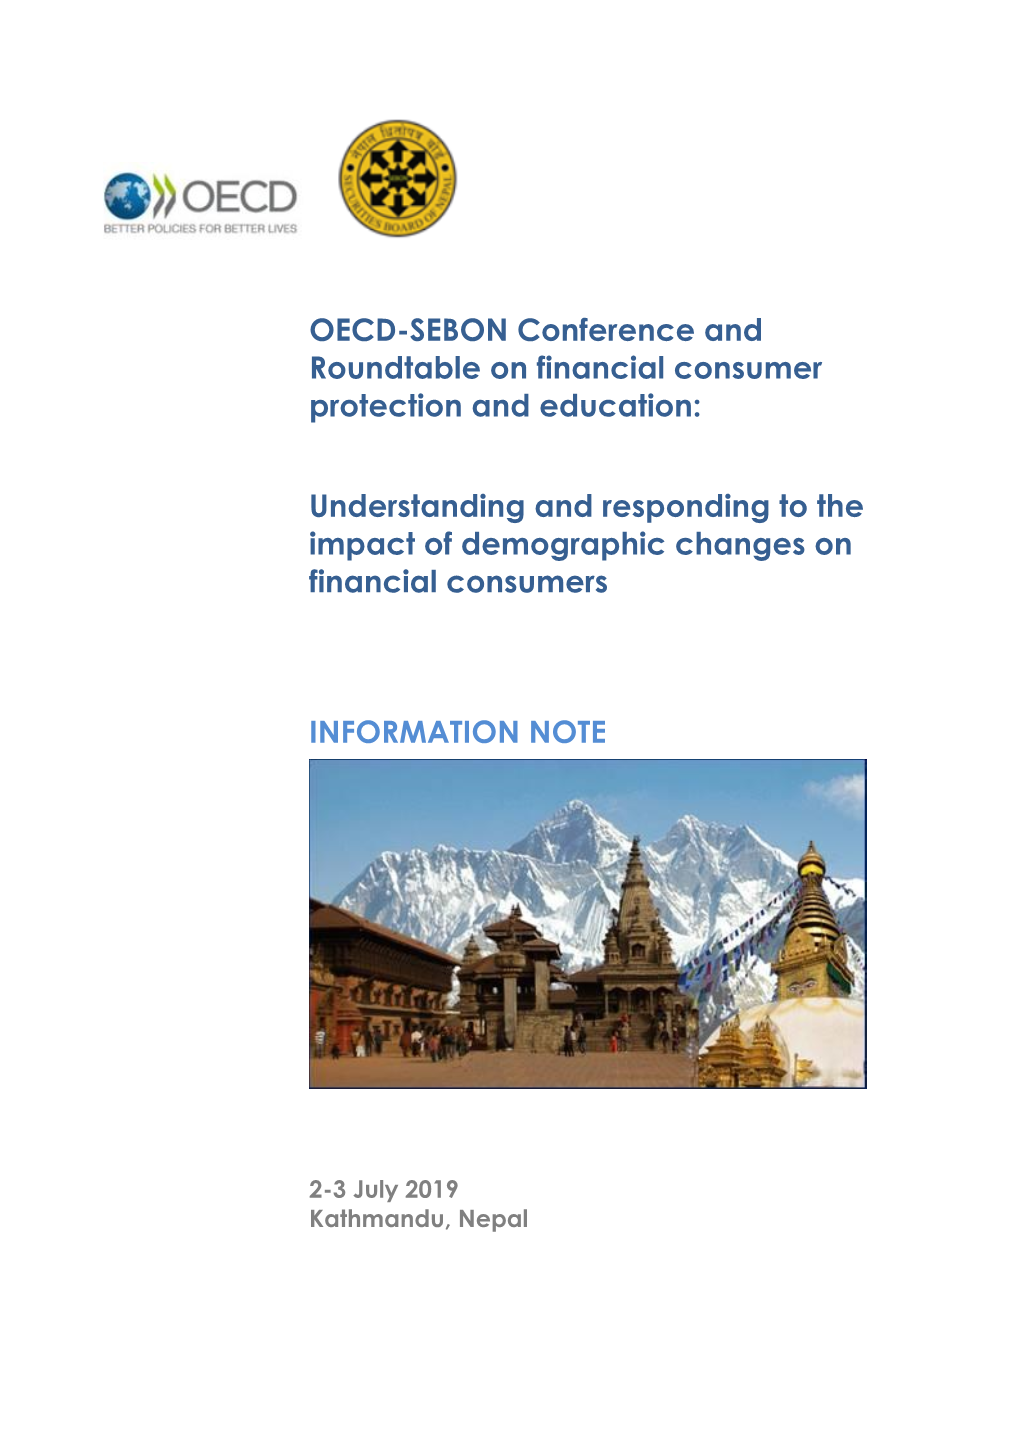 OECD-SEBON Conference and Roundtable on Financial Consumer Protection and Education